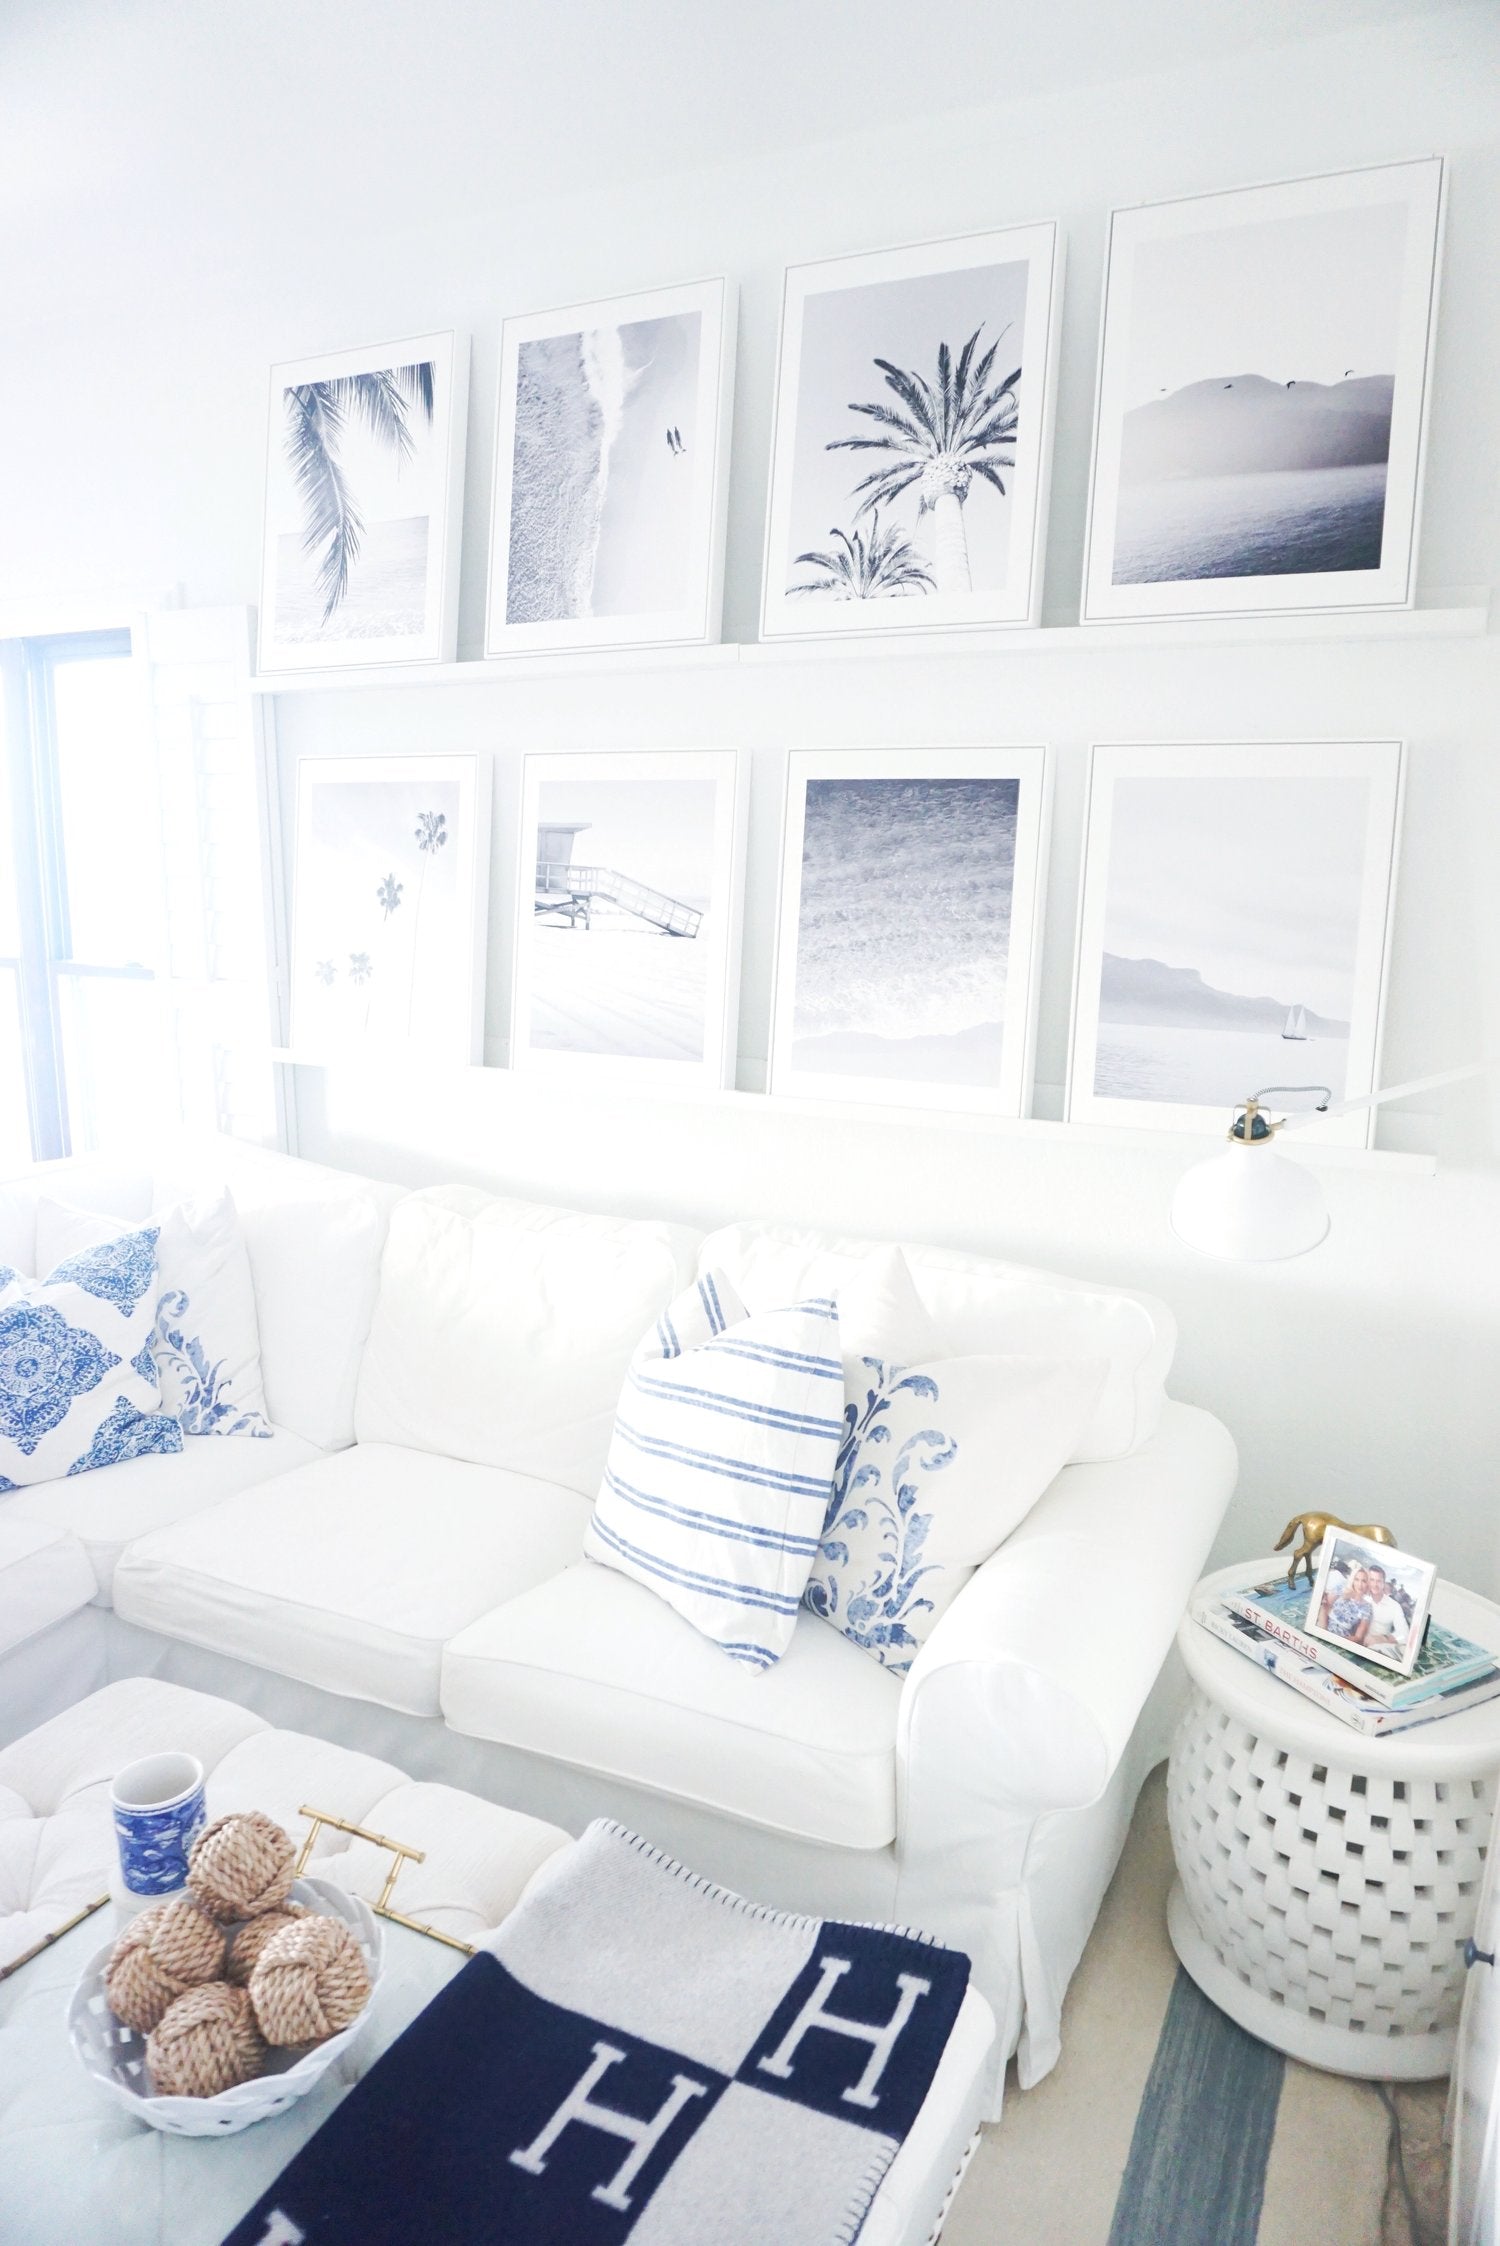 Gallery Wall of White Shadow Box Floater Frames Displayed in Living Room